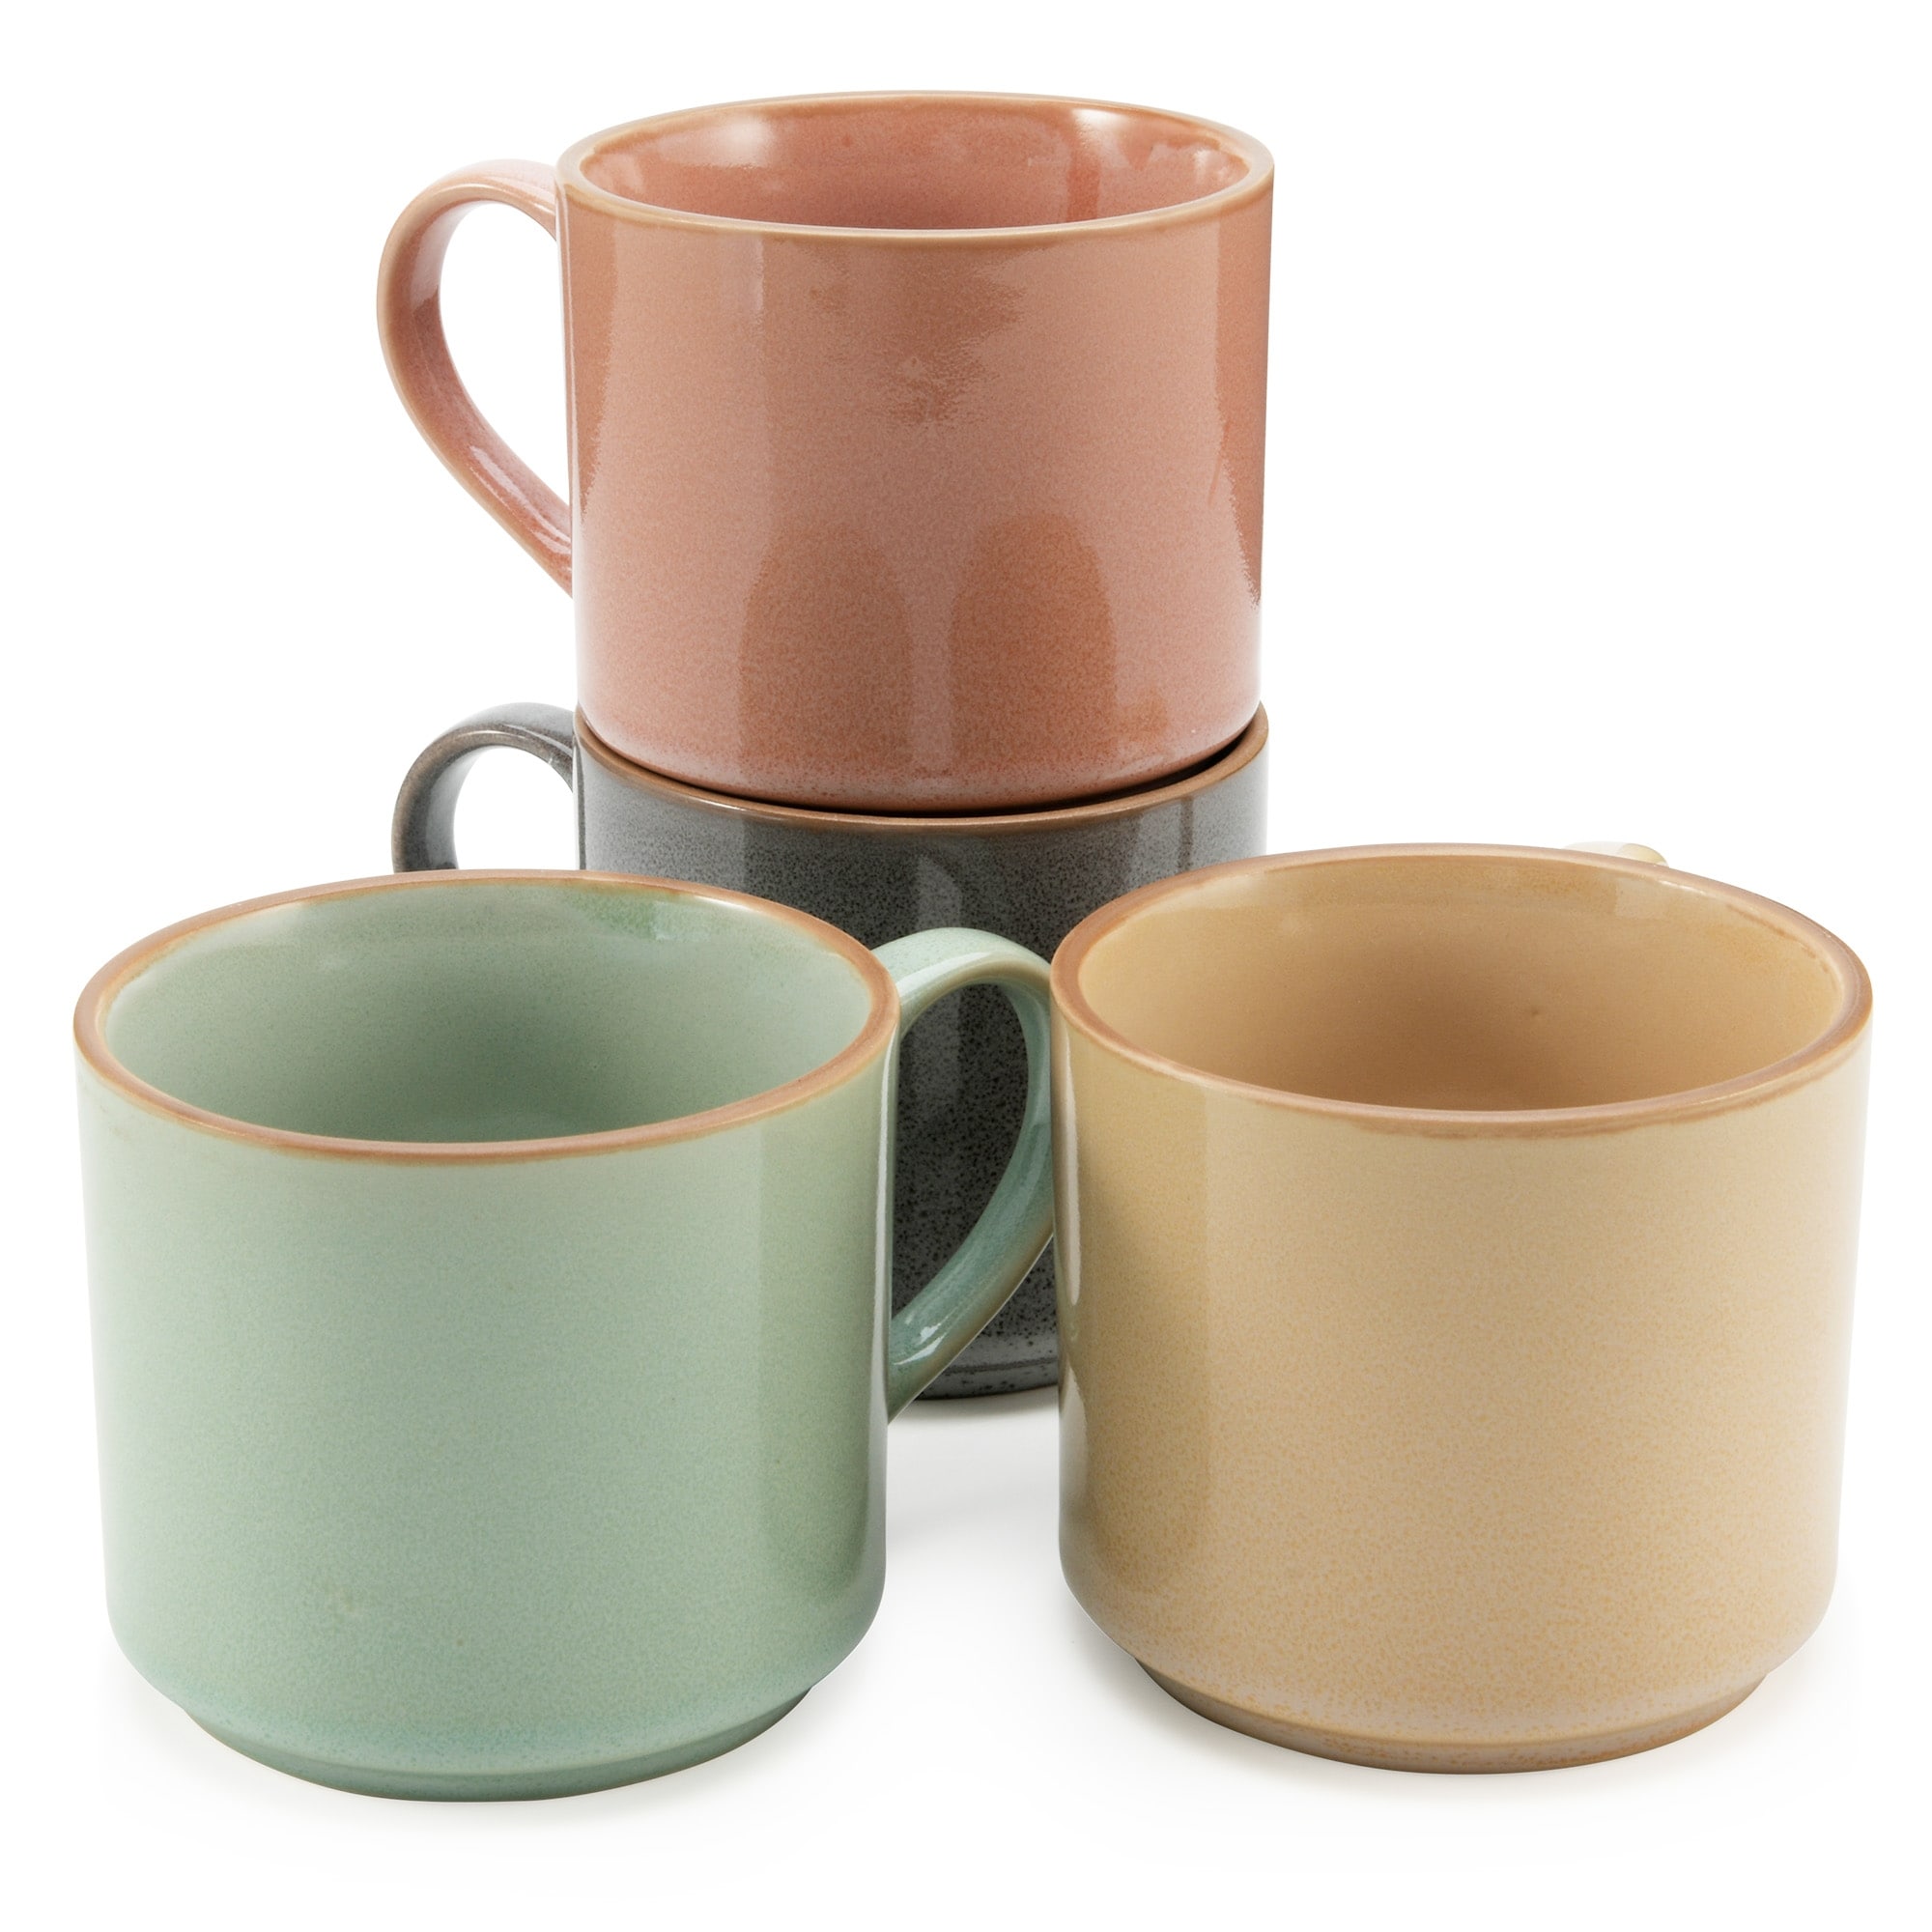 American Atelier Stackable Stoneware 16 oz. Coffee Mugs, Set of 4